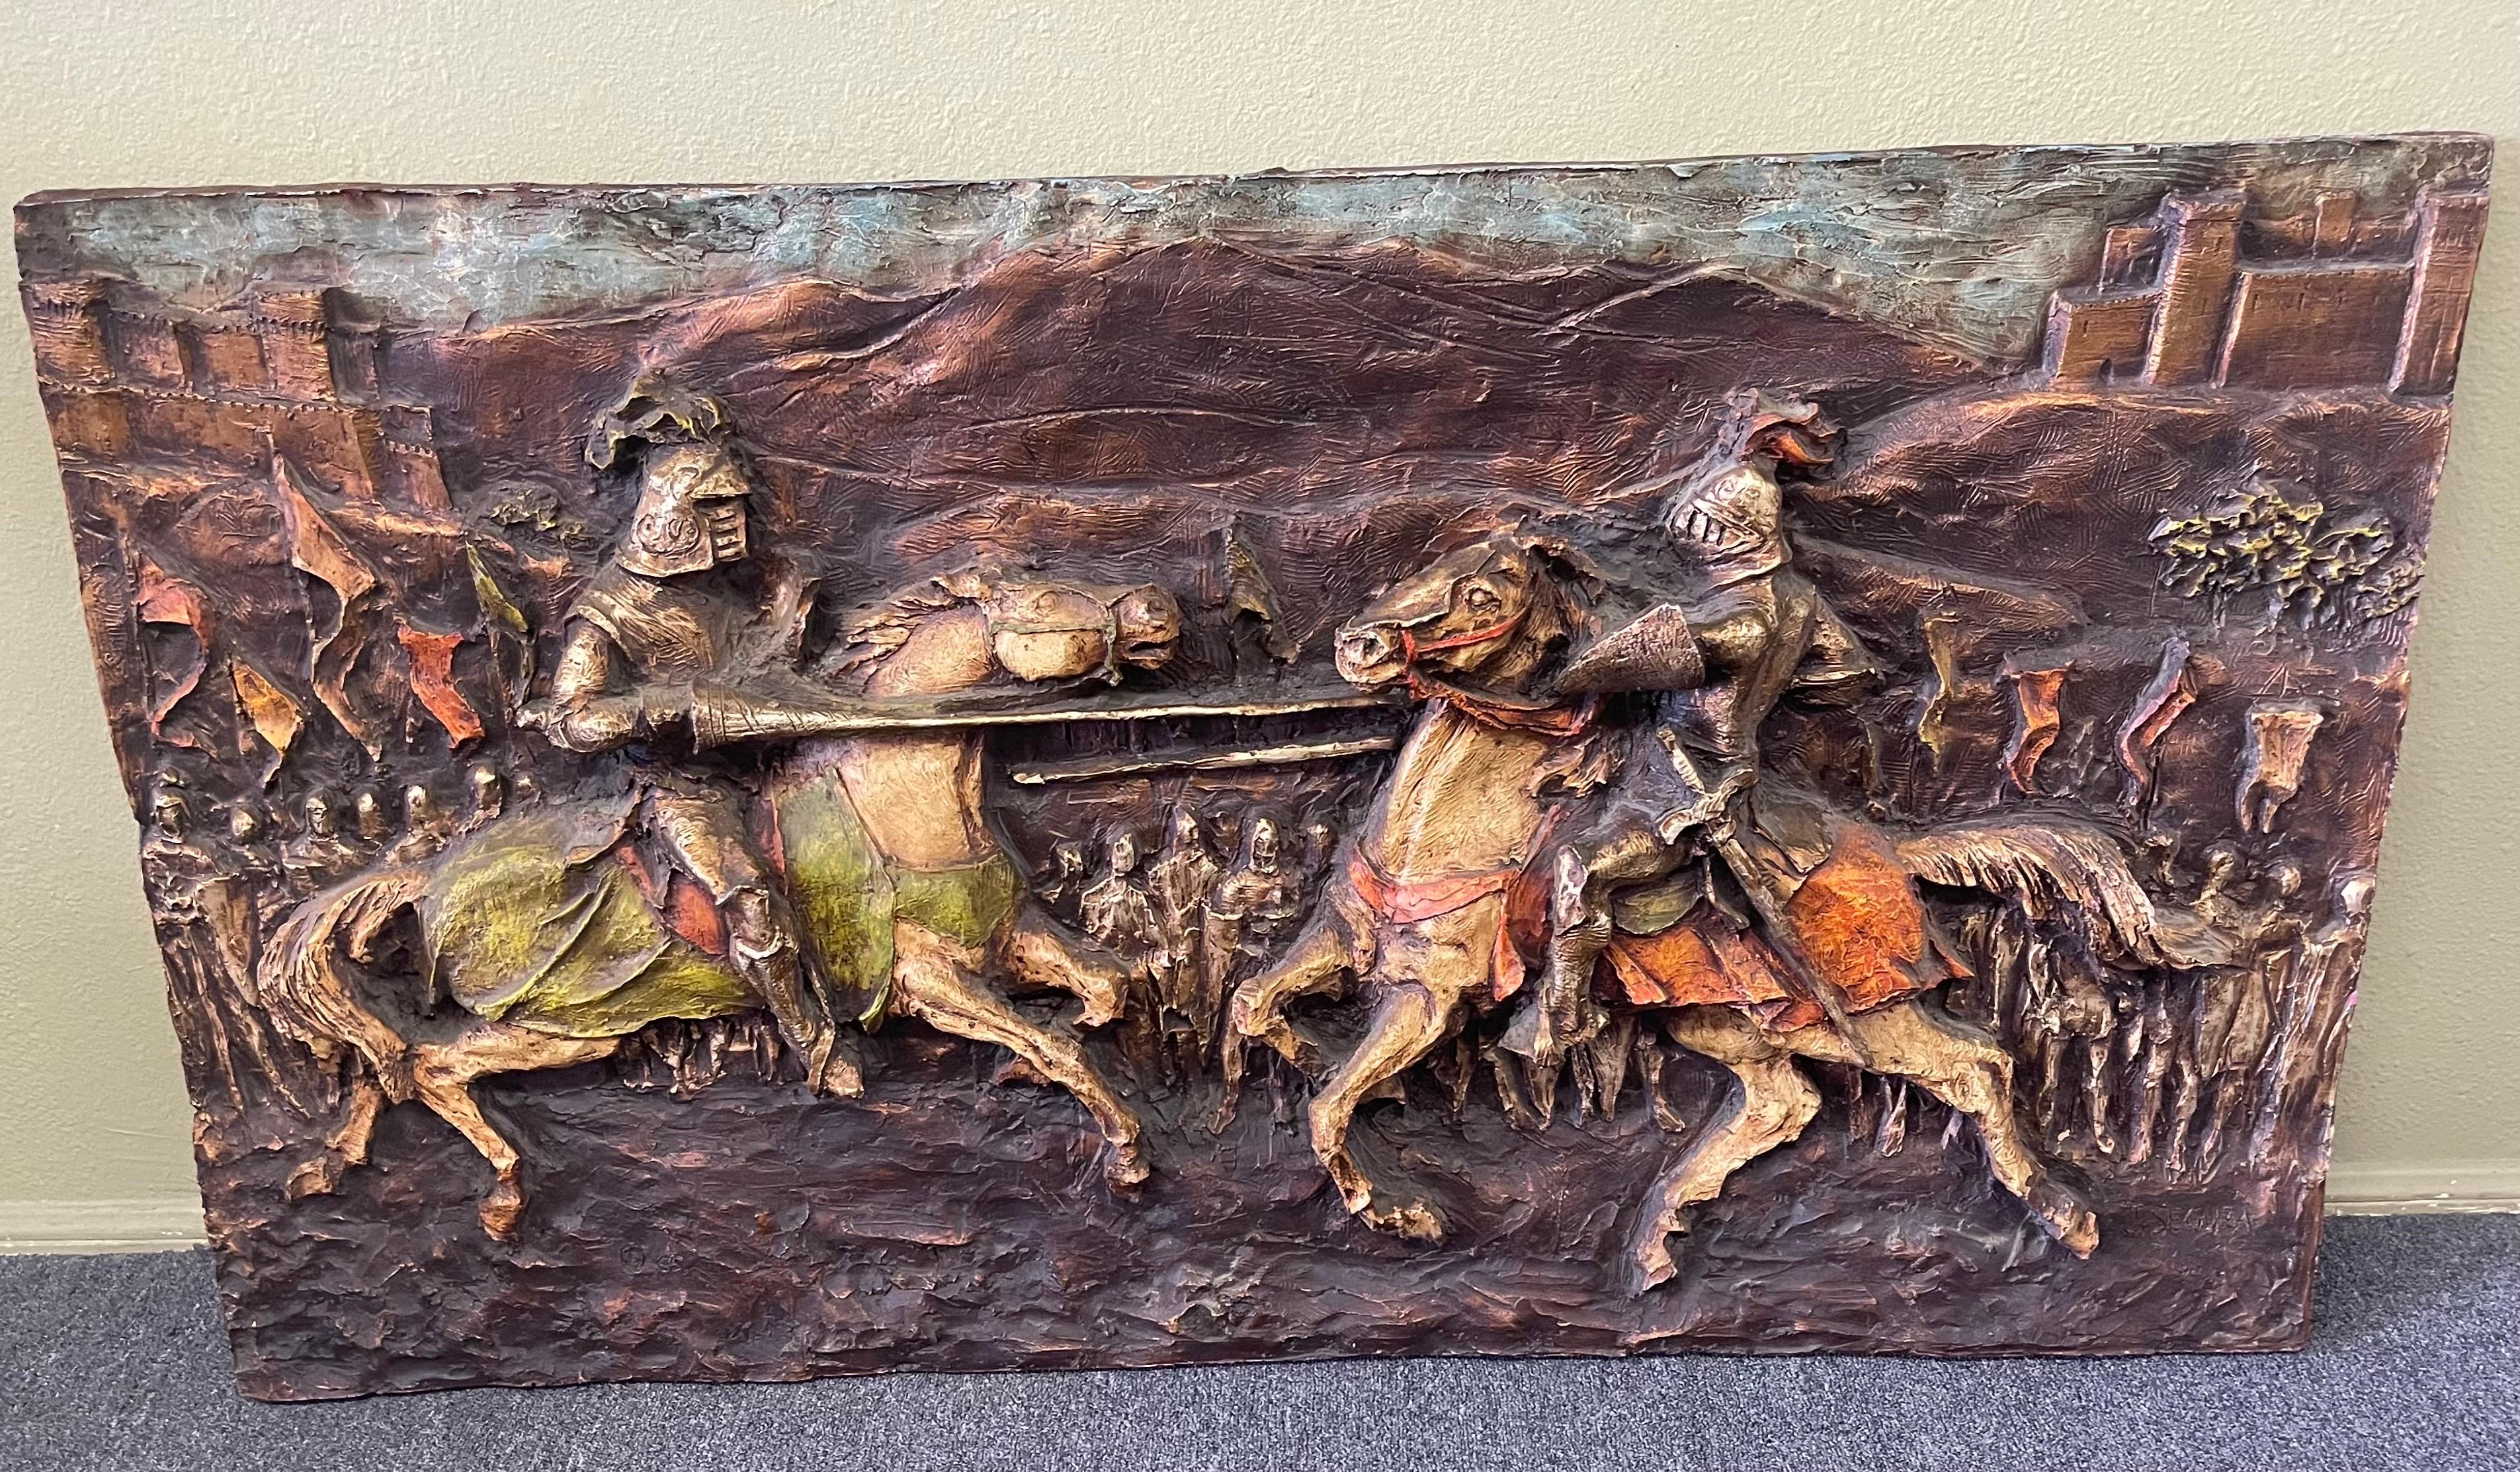 A modernist 3D figural wall sculpture / art of knights jousting by J. Segura for Segura Studios, circa 1965. Fiberglass construction with richly painted textured surface captures the knights and the landscape behind them. The rich brown background